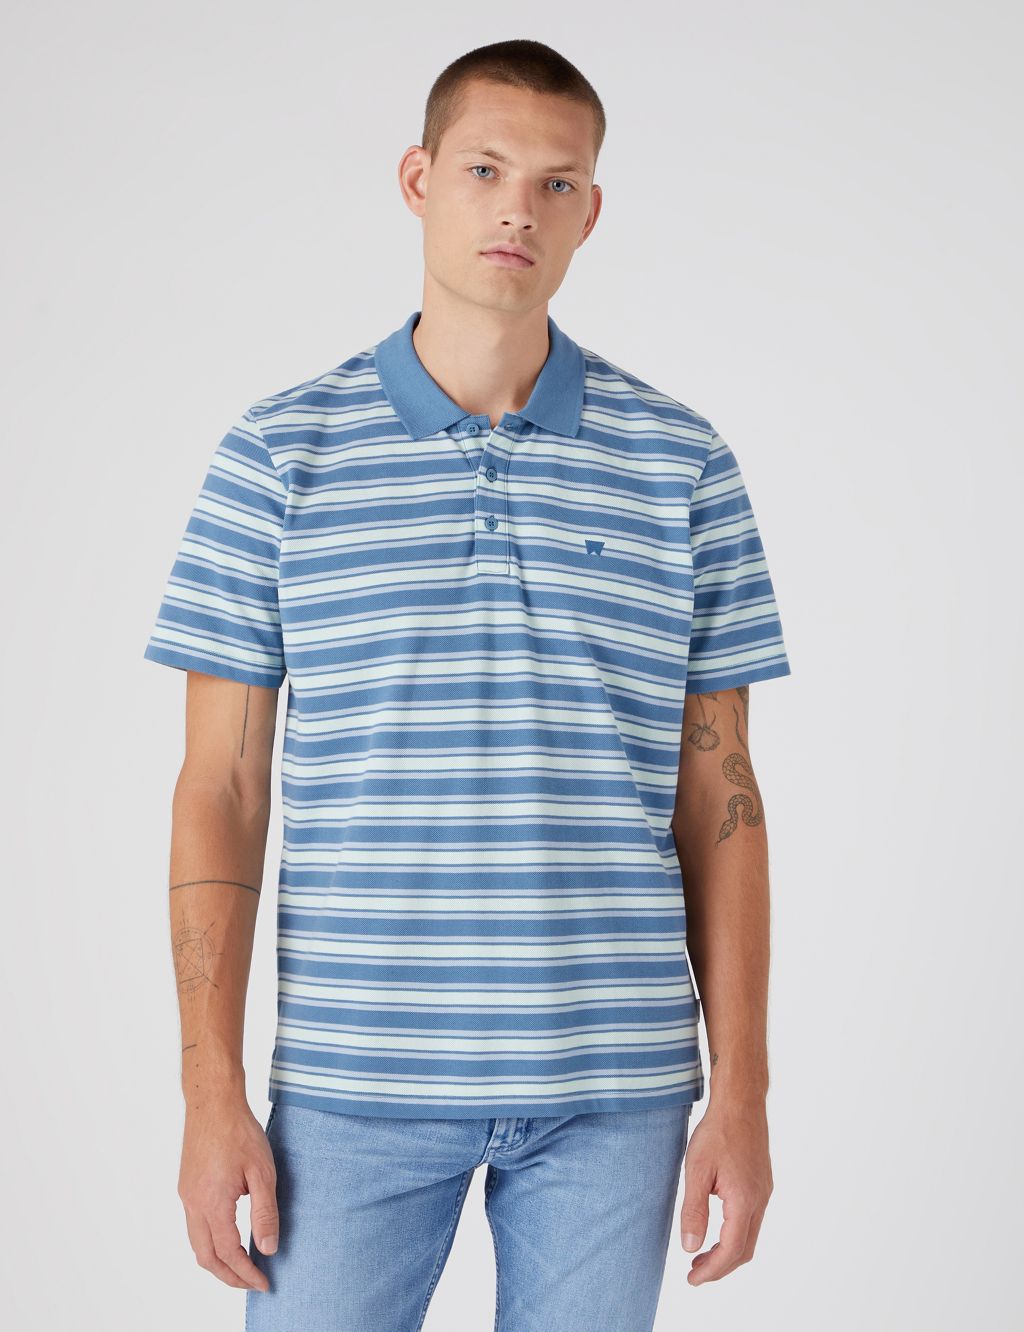 Relaxed Fit Pure Cotton Striped Polo Shirt | Wrangler | M&S